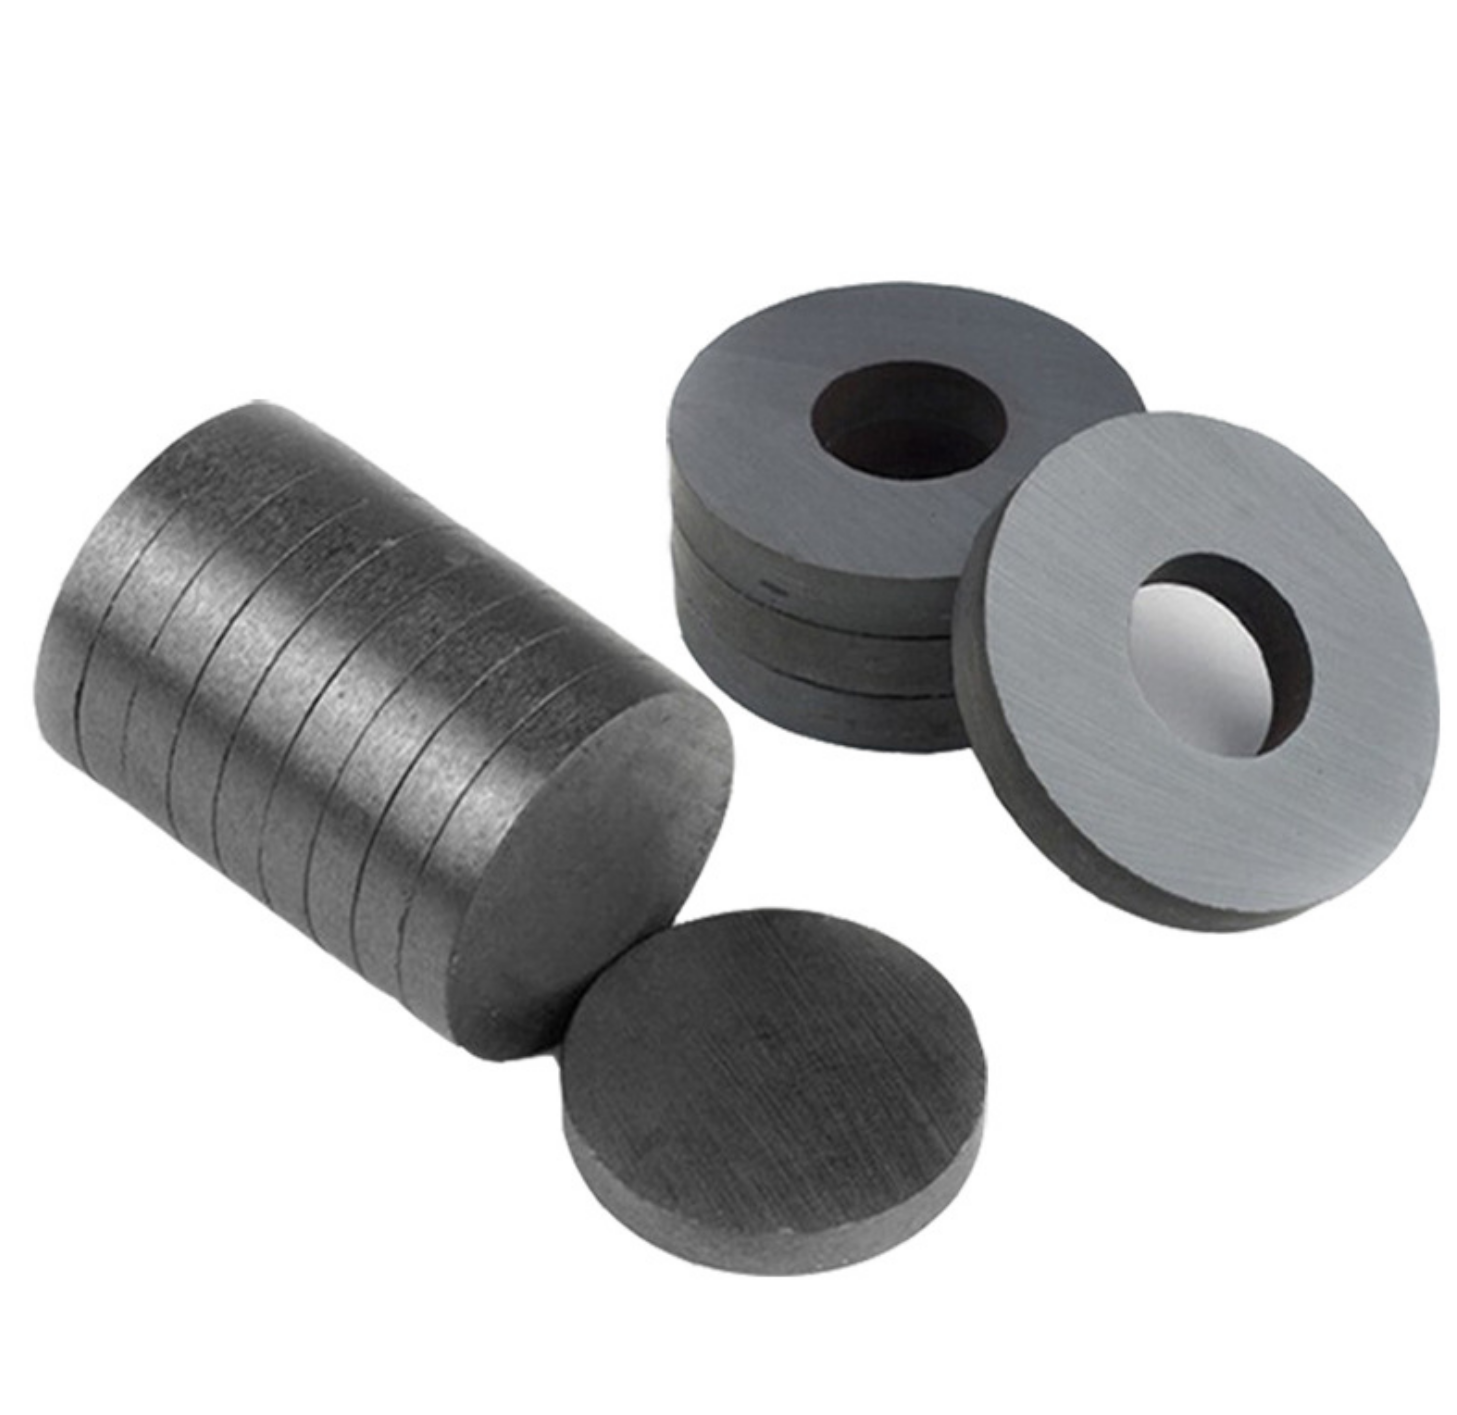 Axial 2-pole Radial Ring Ferrite Magnets for Electric Motor